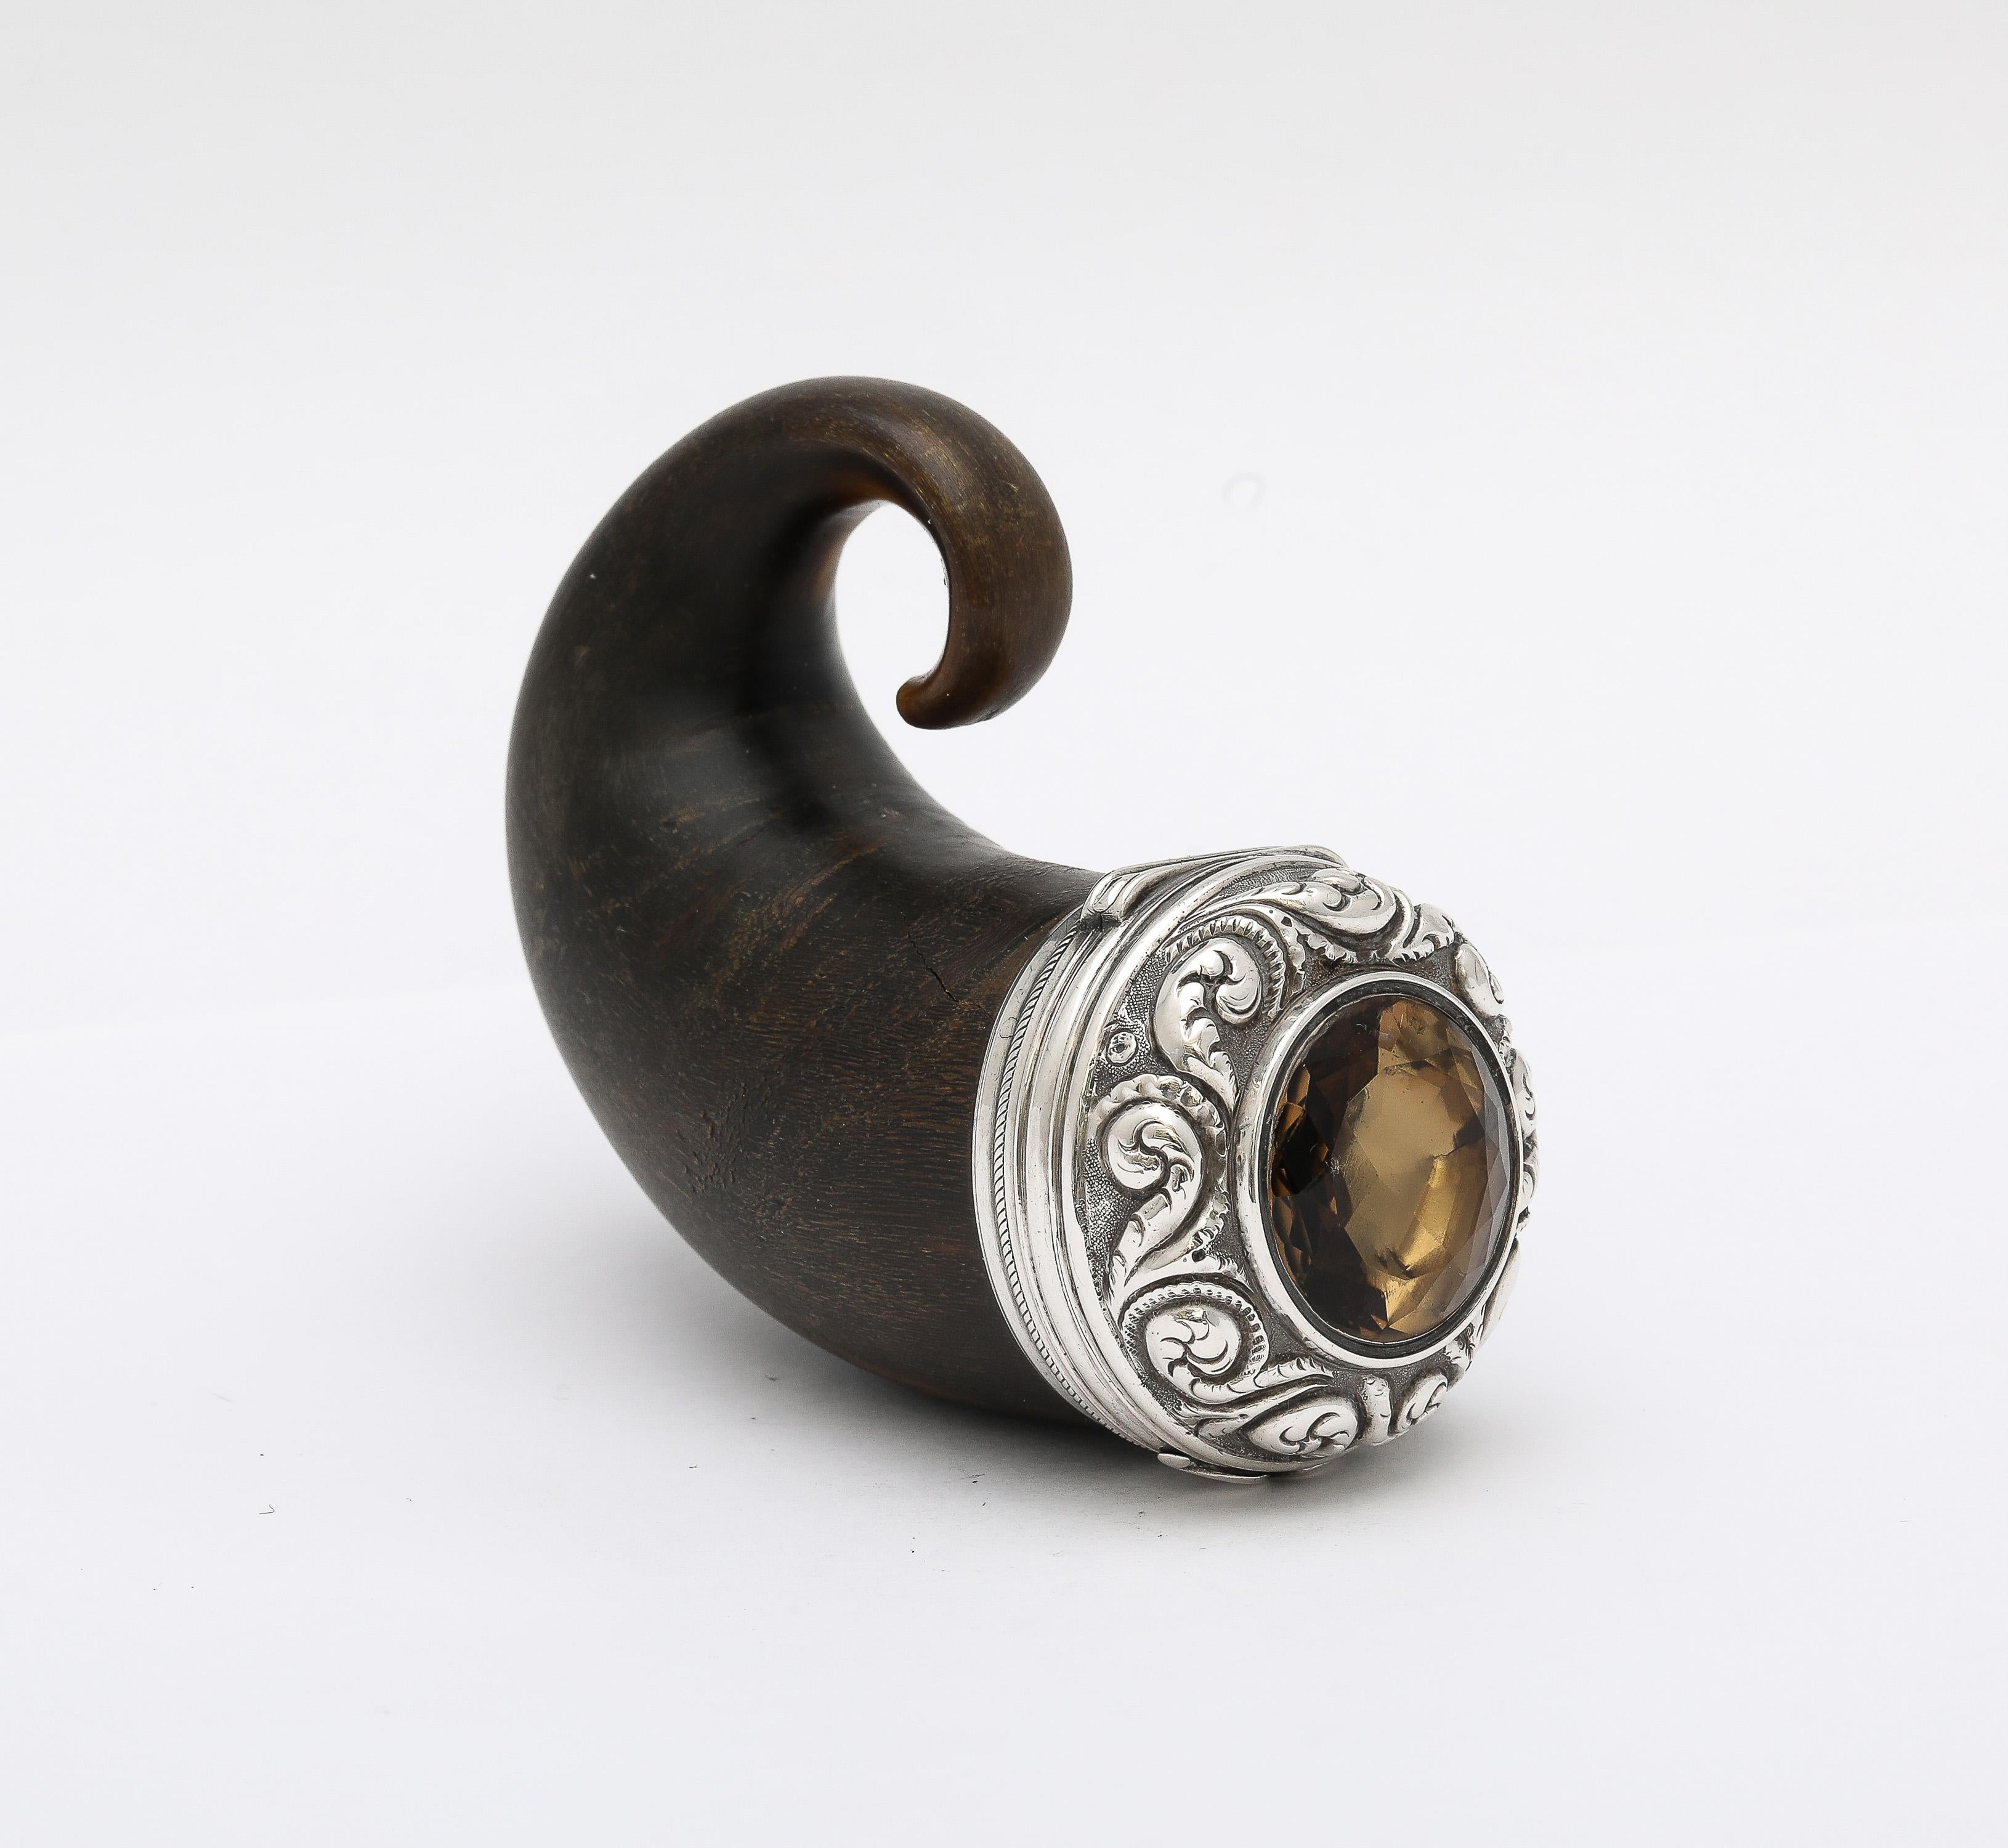 George III Period, sterling silver-mounted (unmarked but tested), ram's horn snuff mull with hinged lid. The lid is inset with a central, faceted cairngorm stone which is surrounded by the sterling silver scroll designed  mount, Scotland, Ca. 1810.